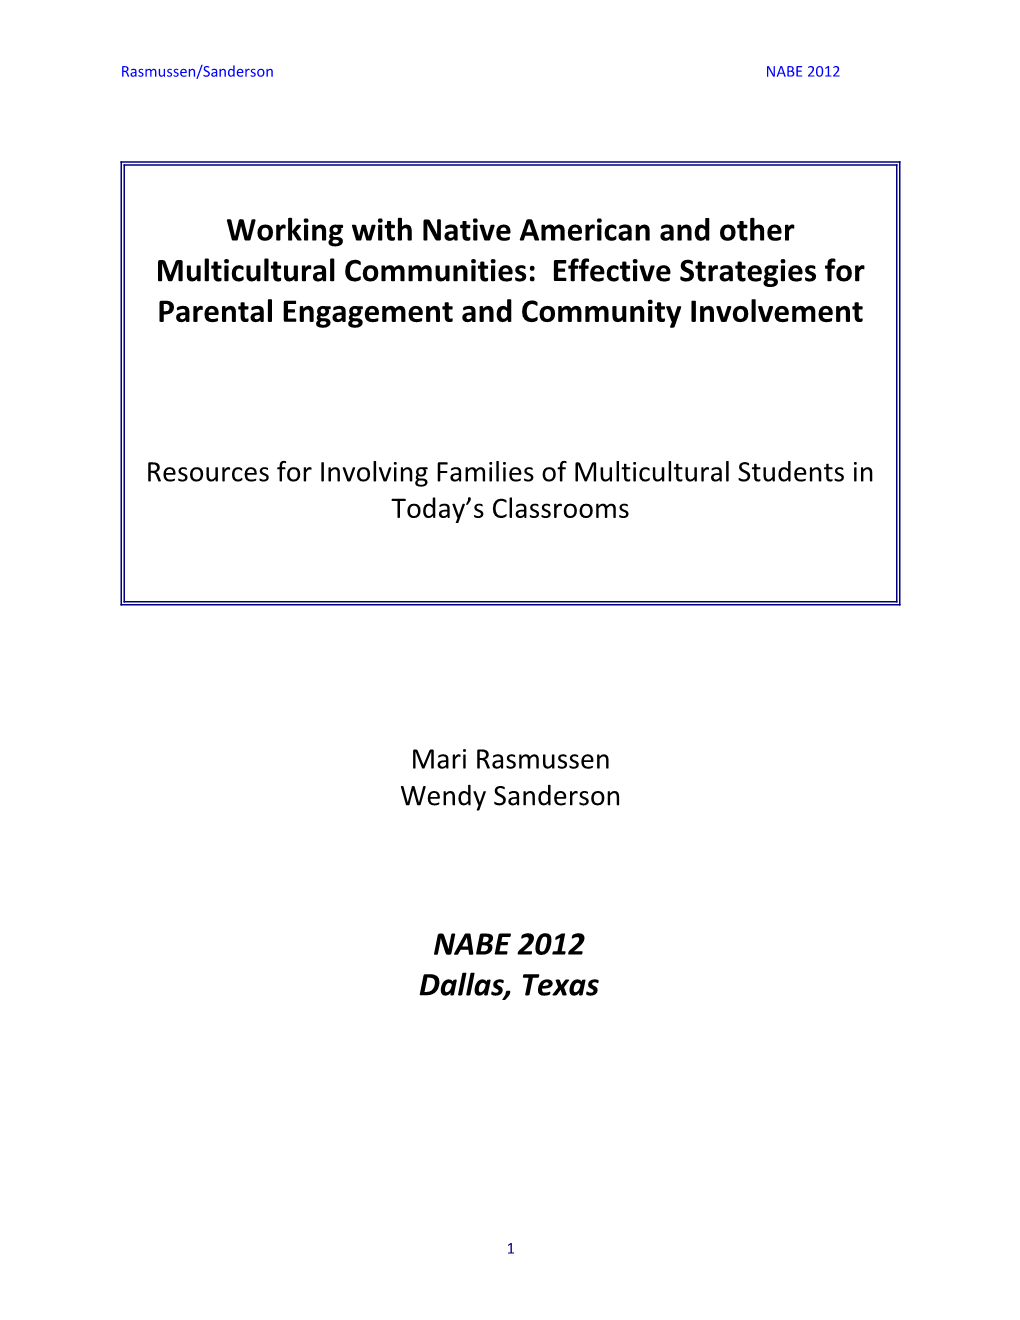 Working with Native American and Other Multicultural Communities: Effective Strategies